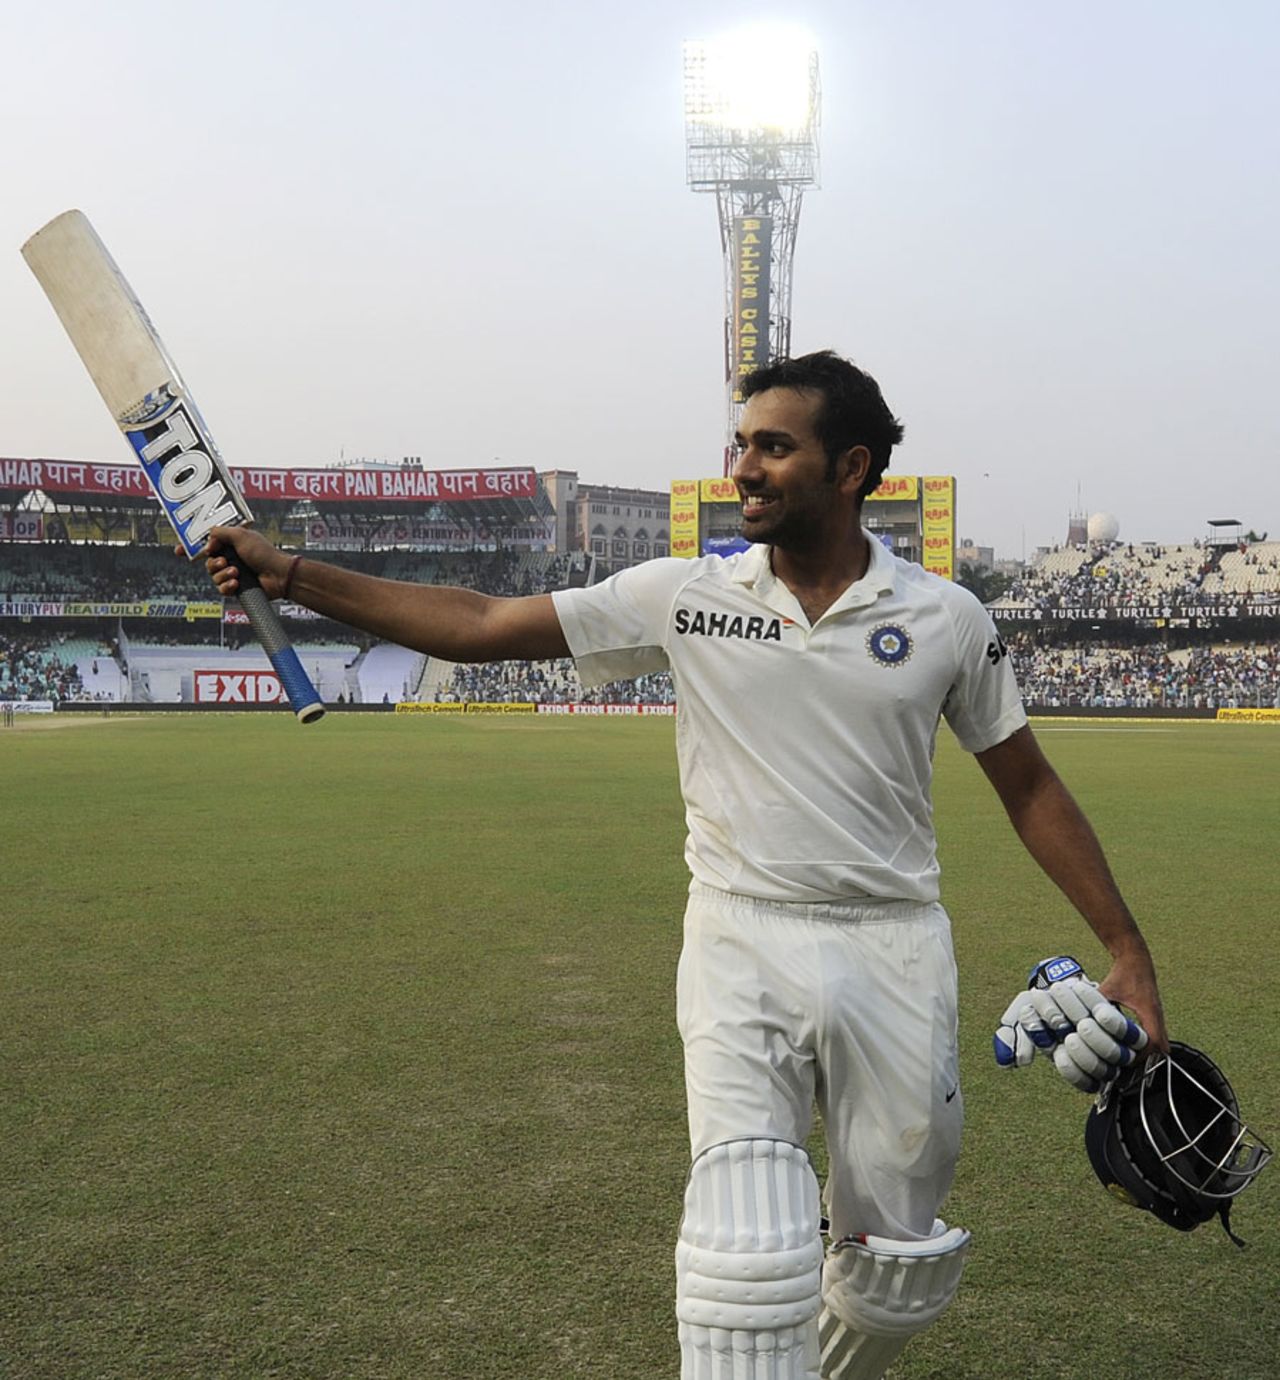 Rohit Sharma acknowledges the crowd after making a ton on his Test debut, India v West Indies, 1st Test, Kolkata, 2nd day, November 7, 2013